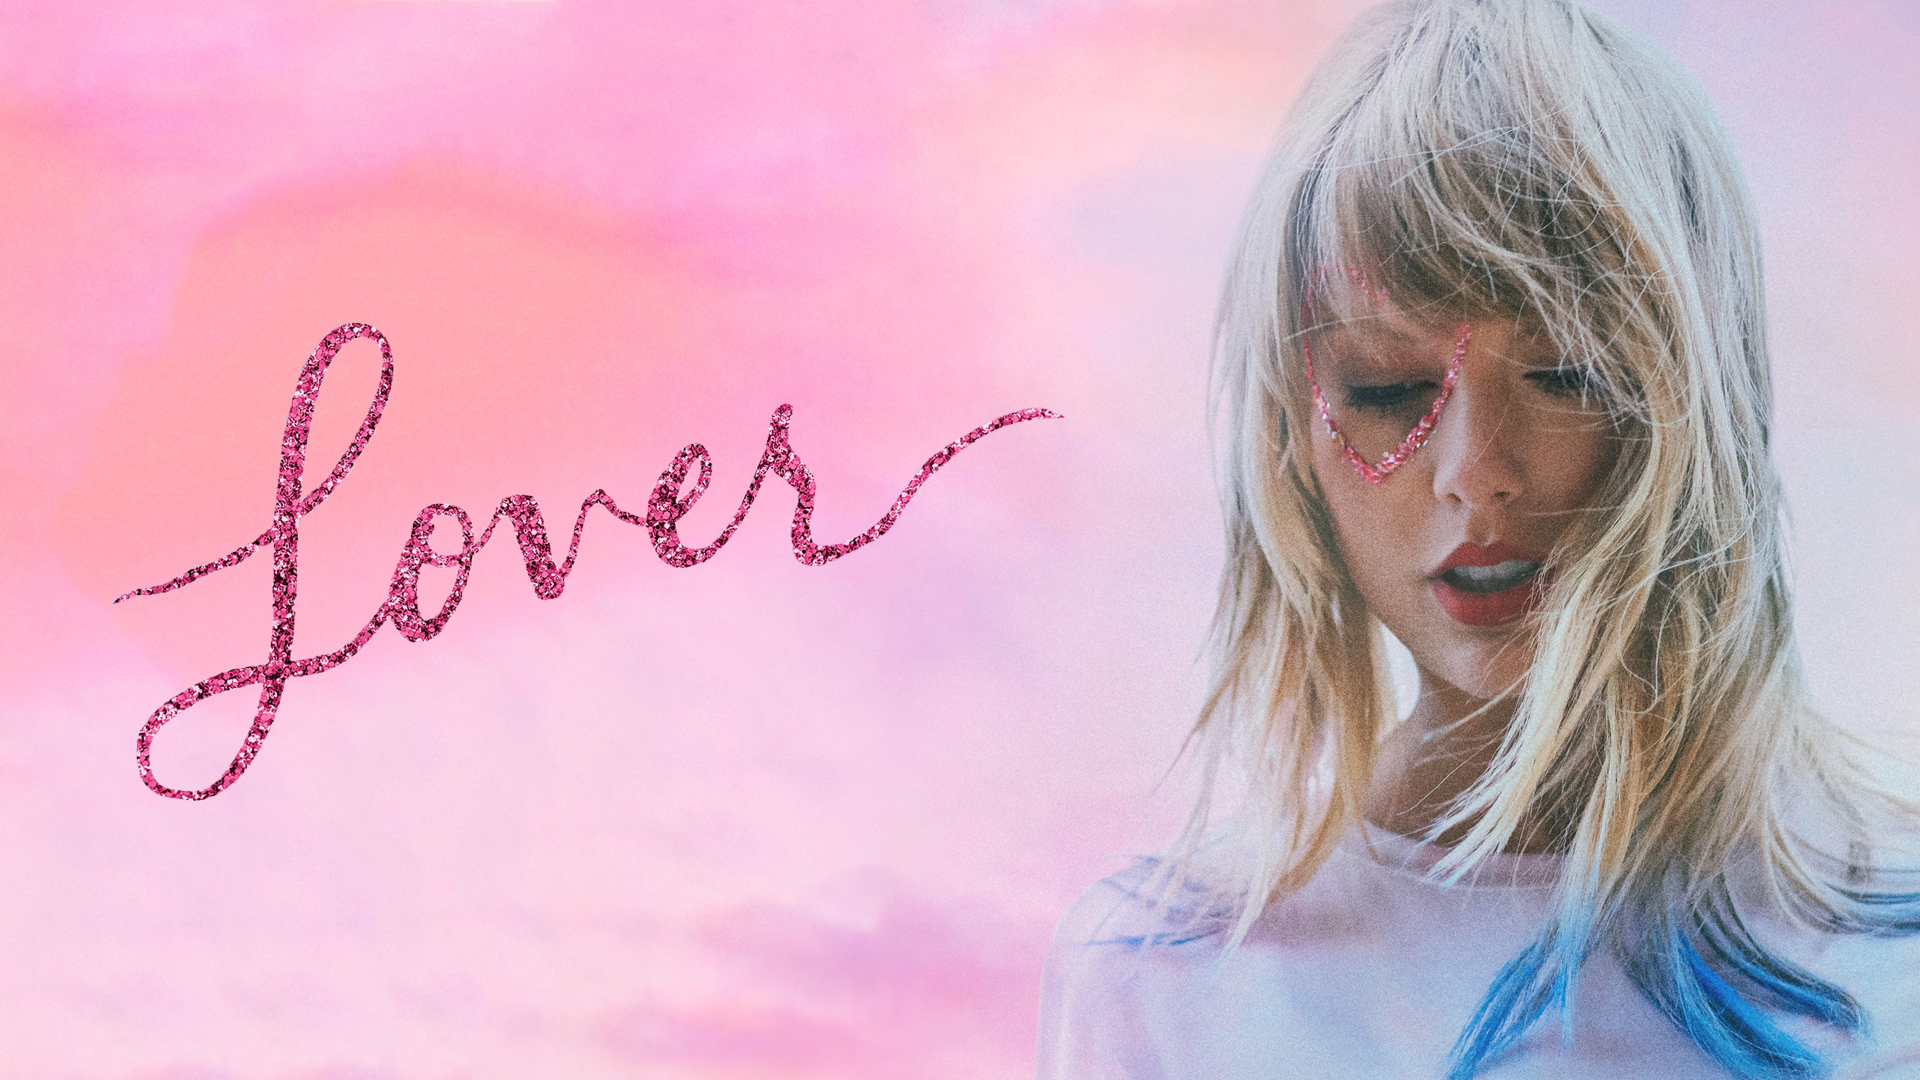 Can't stop listening to YNTCD so I made some Lover wallpaper! Static image in the album and Wallpaper Engine versions in the comments! ?